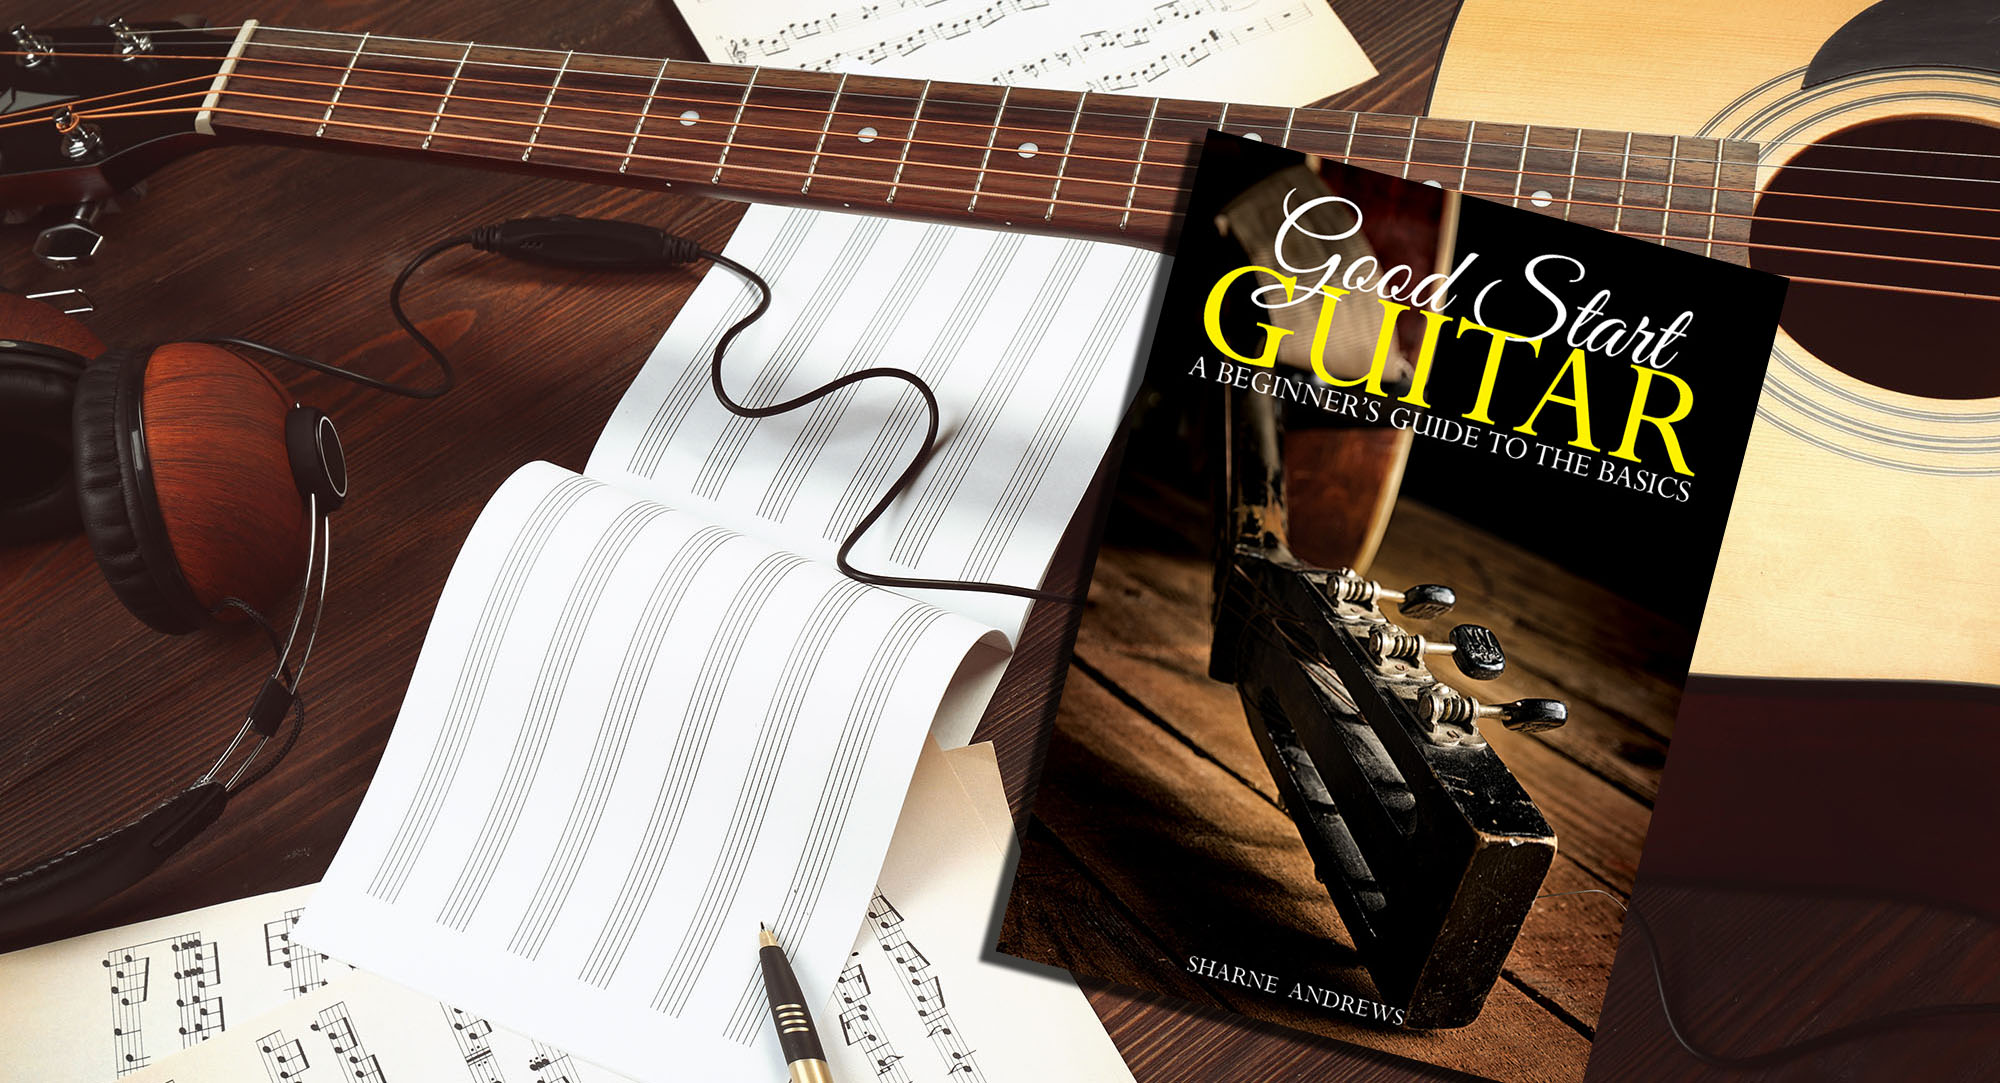 Good Start Guitar, A beginners Guide to the Basics